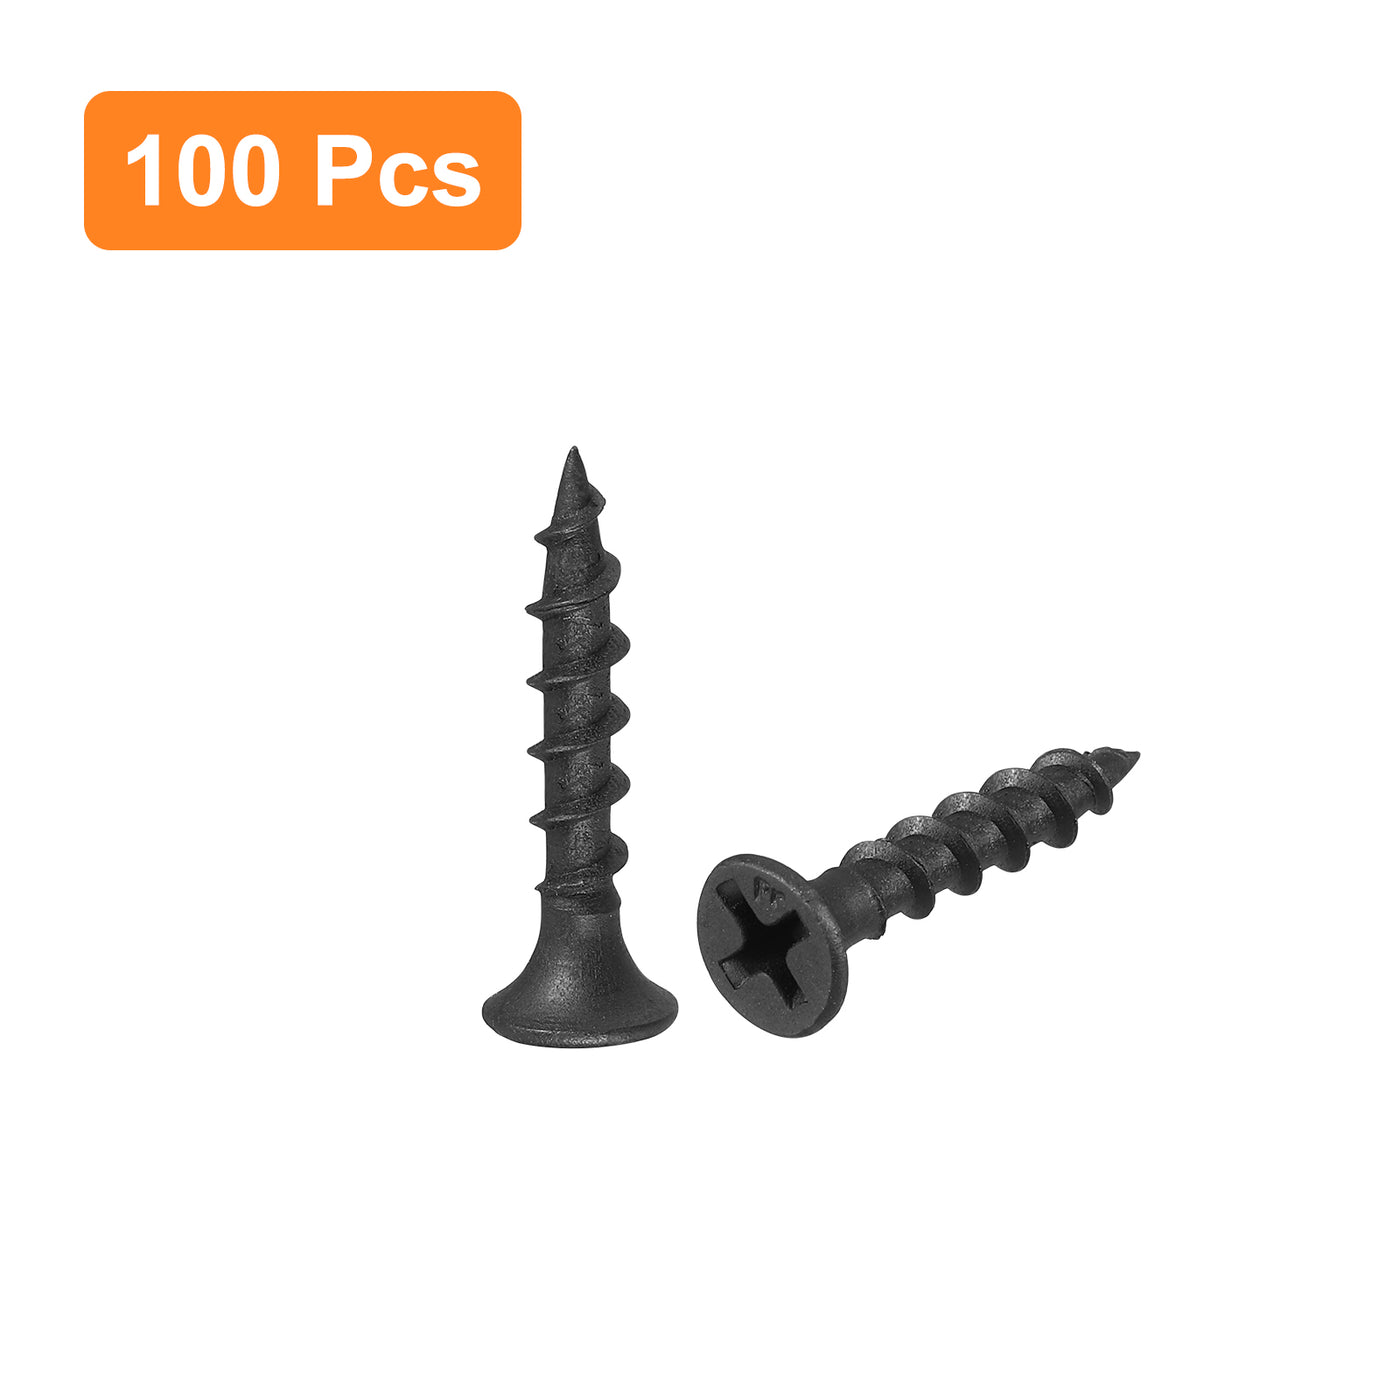 uxcell Uxcell M3.8x25mm 100pcs Phillips Drive Wood Screws, Carbon Steel Self Tapping Screws